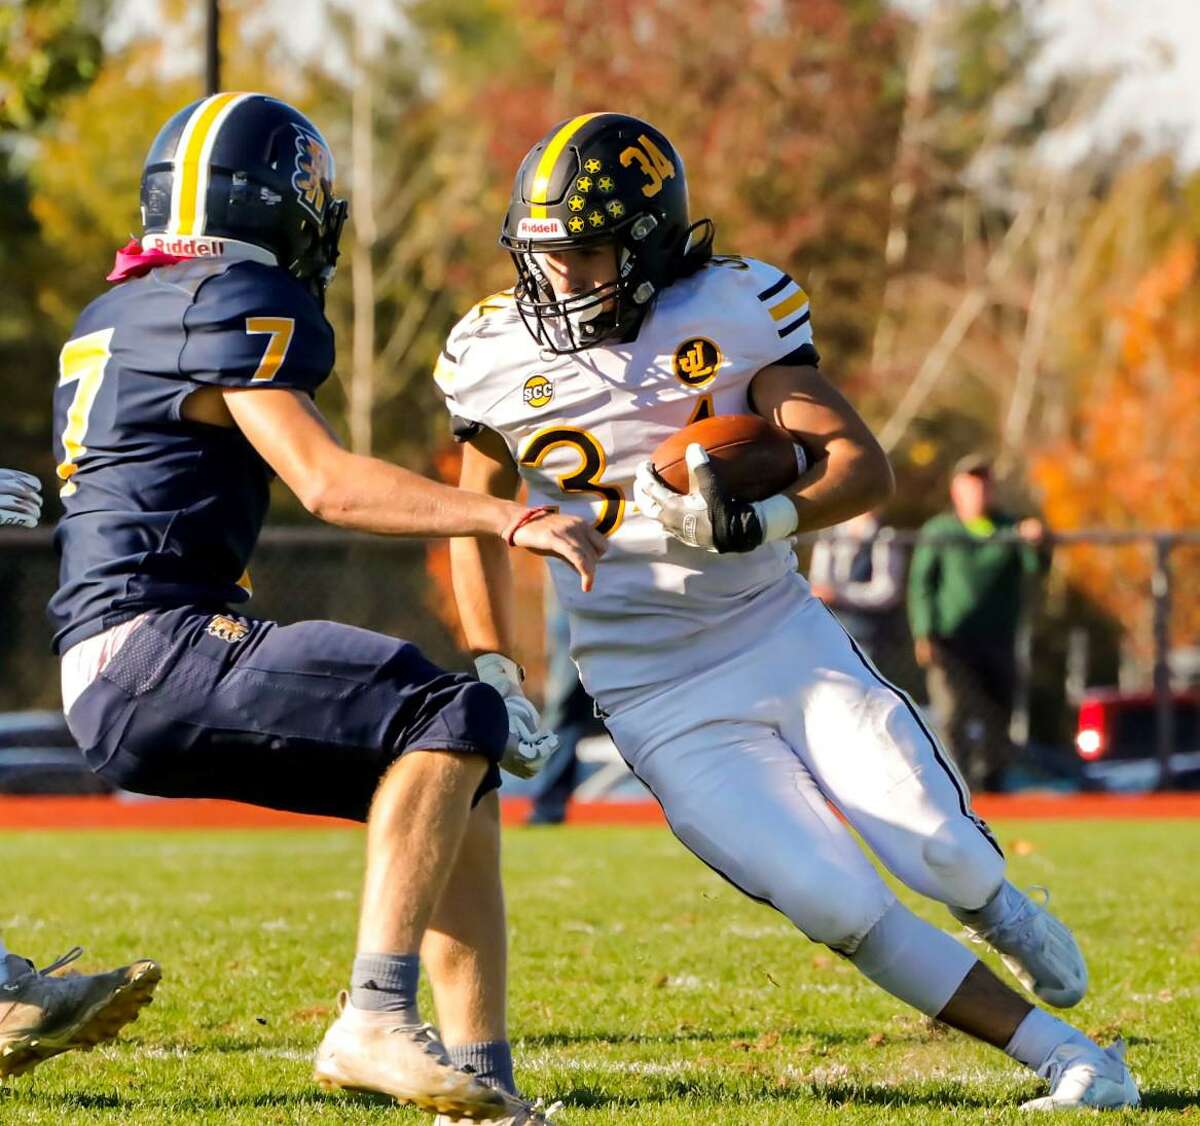 Lucas Pincus-Coyle scored a touchdown and caught seven passes in Law's win at RHAM.